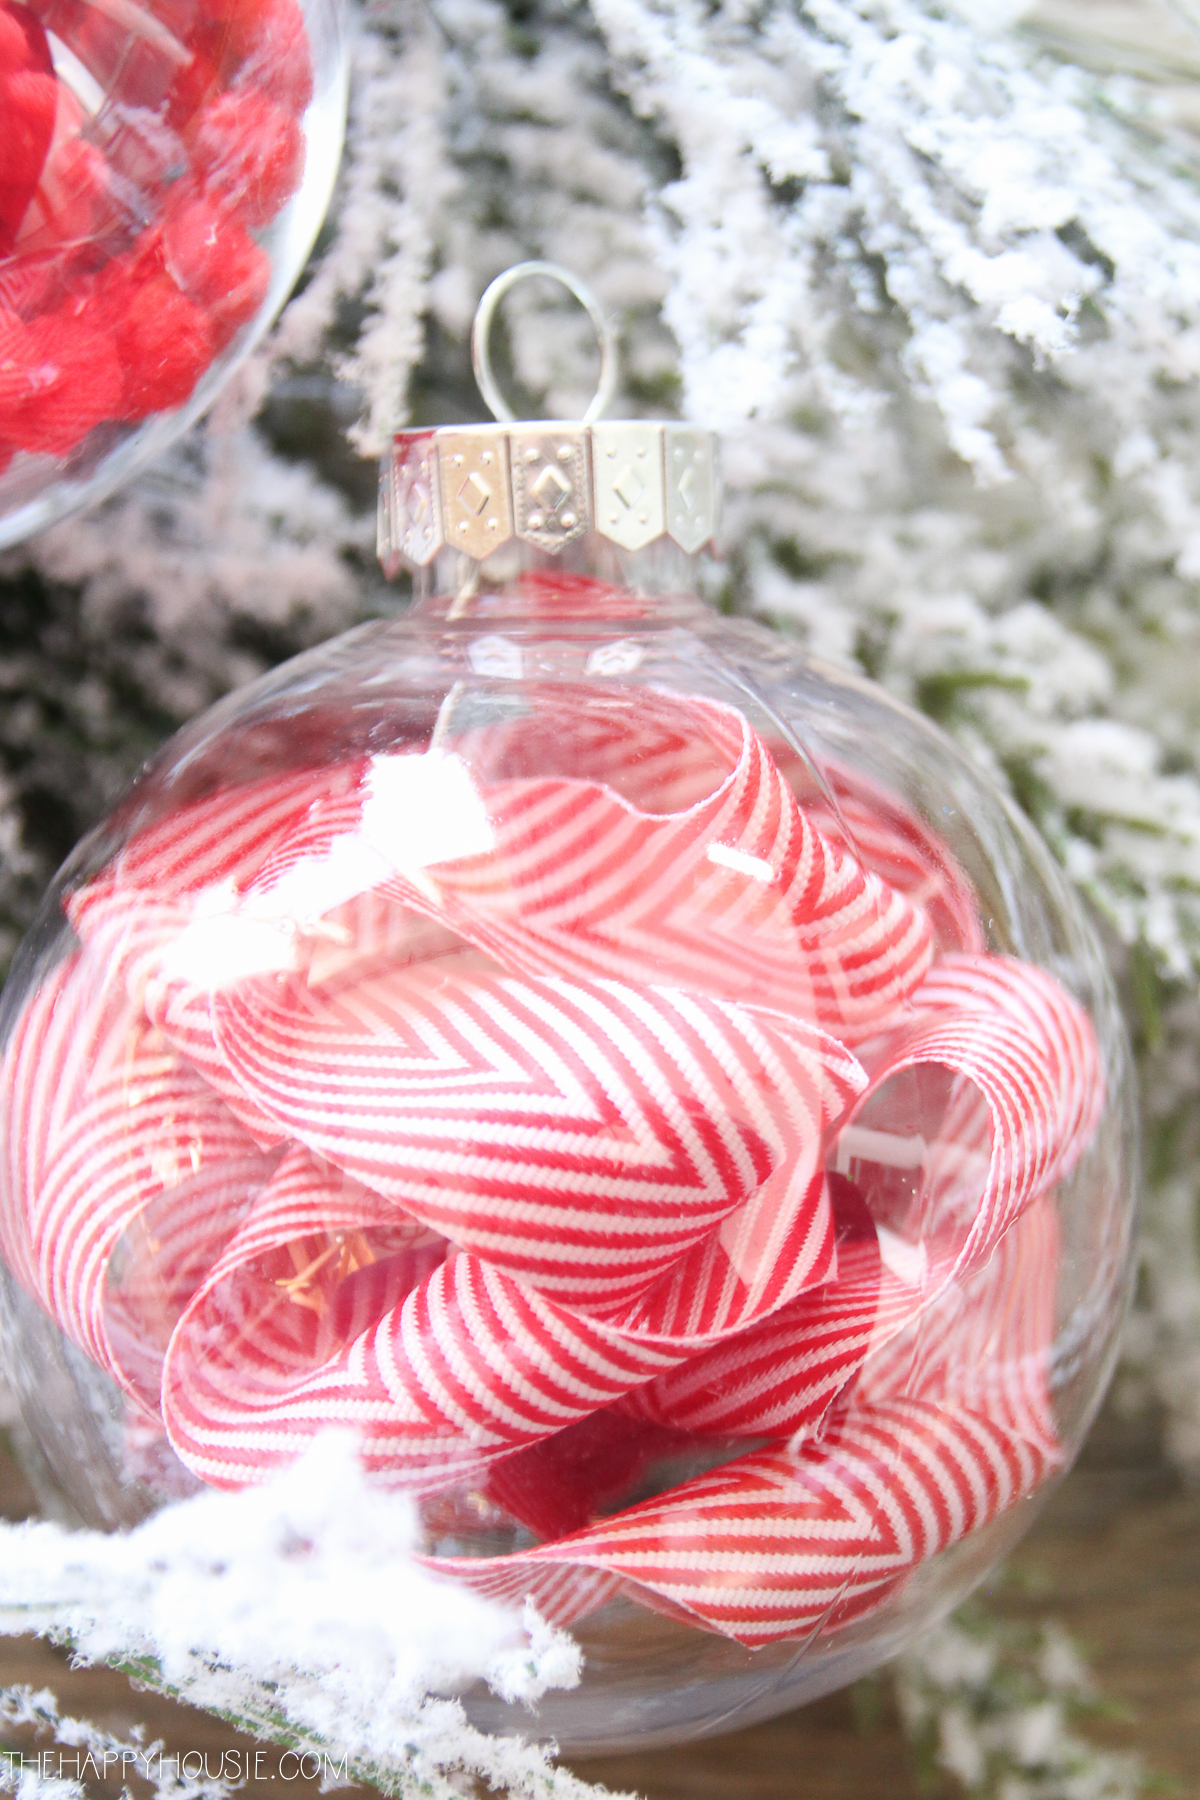 Red and white ribbon in the ornament.